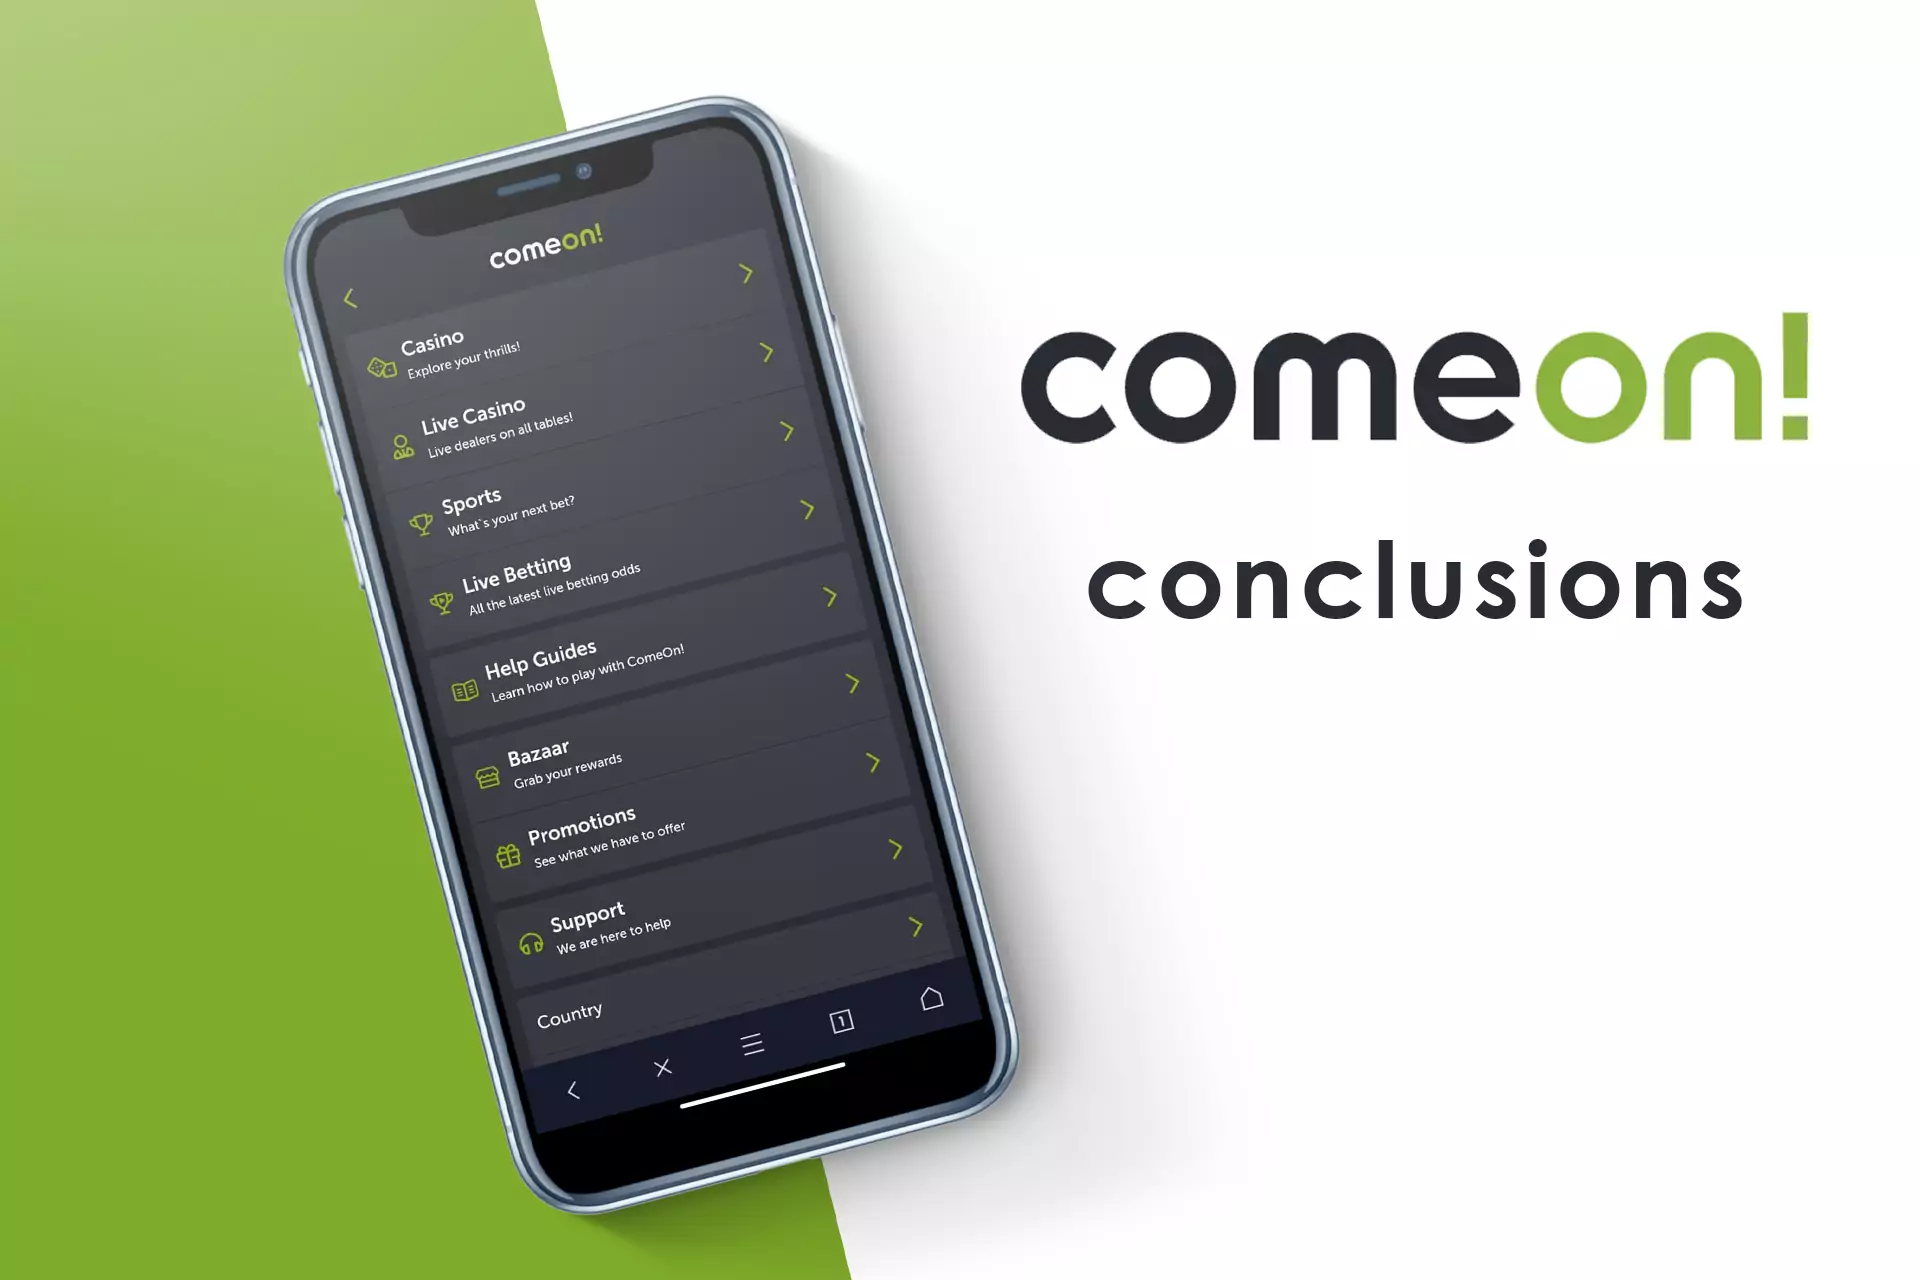 Read the conclusions about the quality of the Comeon app for Android and iOS.